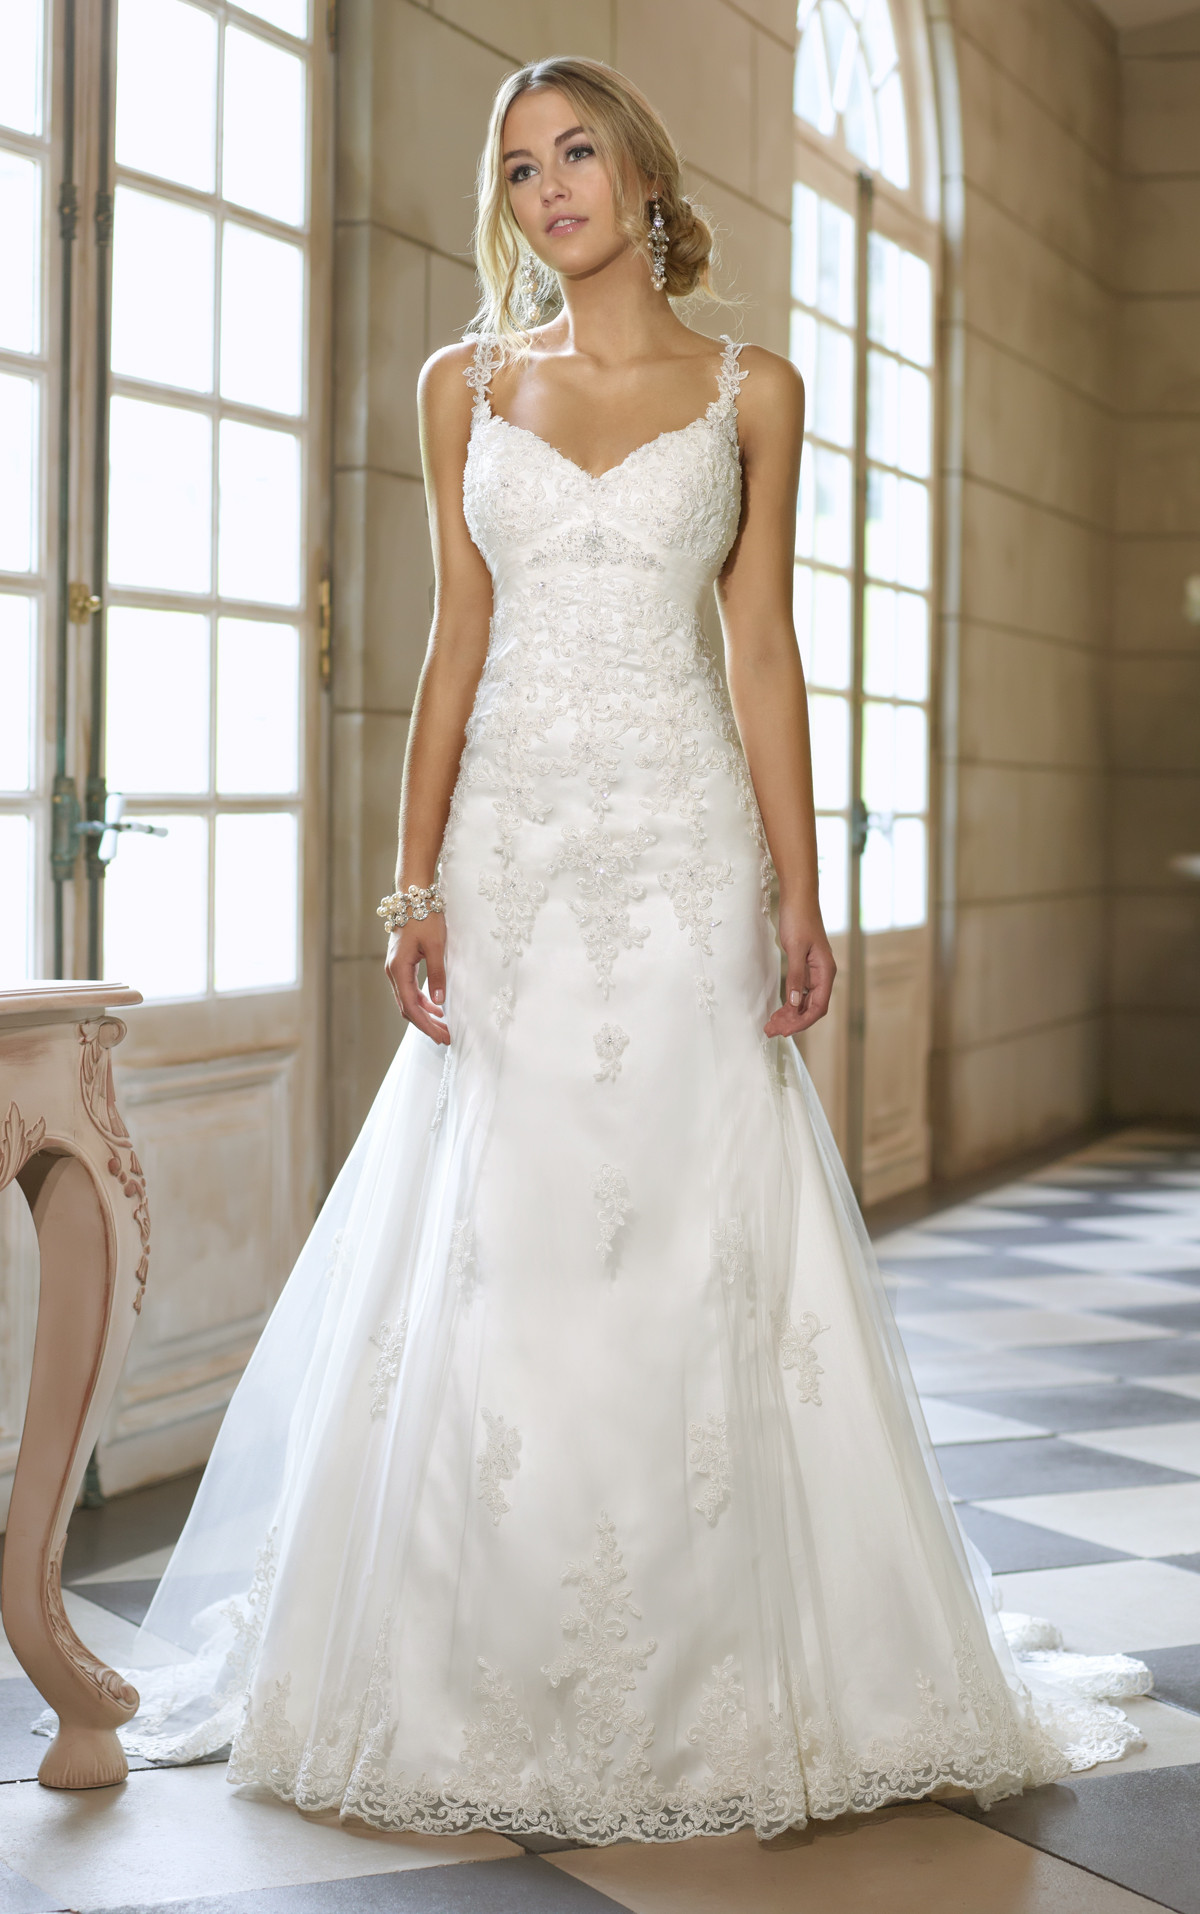 Wedding Gowns With Straps
 Freeshipping 2014 Plus Size Wedding Gowns Lace Sweetheart